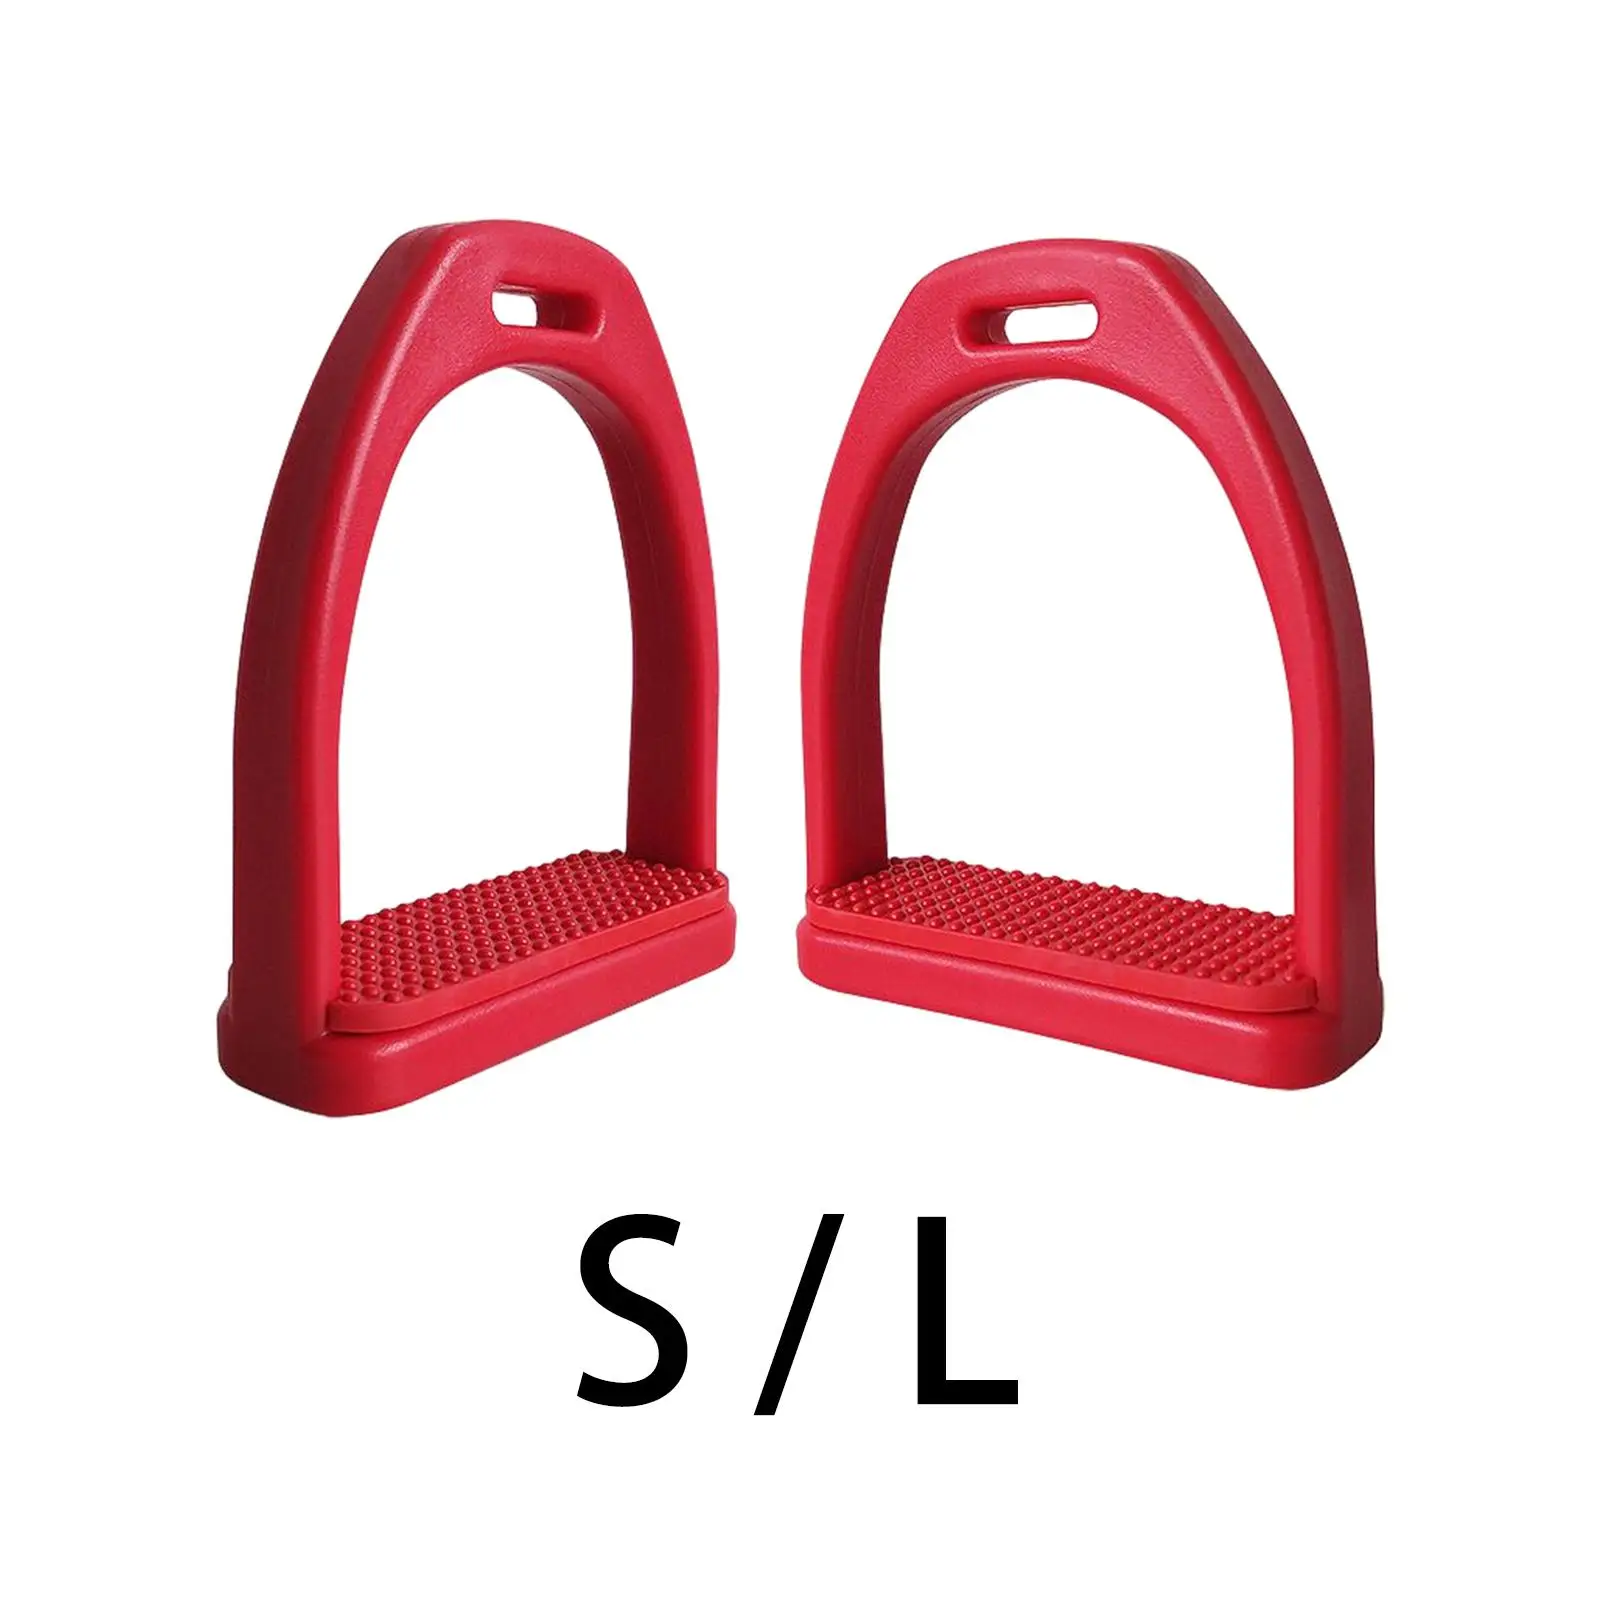 2Pcs Horse Riding Stirrups Equestrian Sports Training Tool Non Slip Rubber Pad for Horse Riding Outdoor Adults Supplies